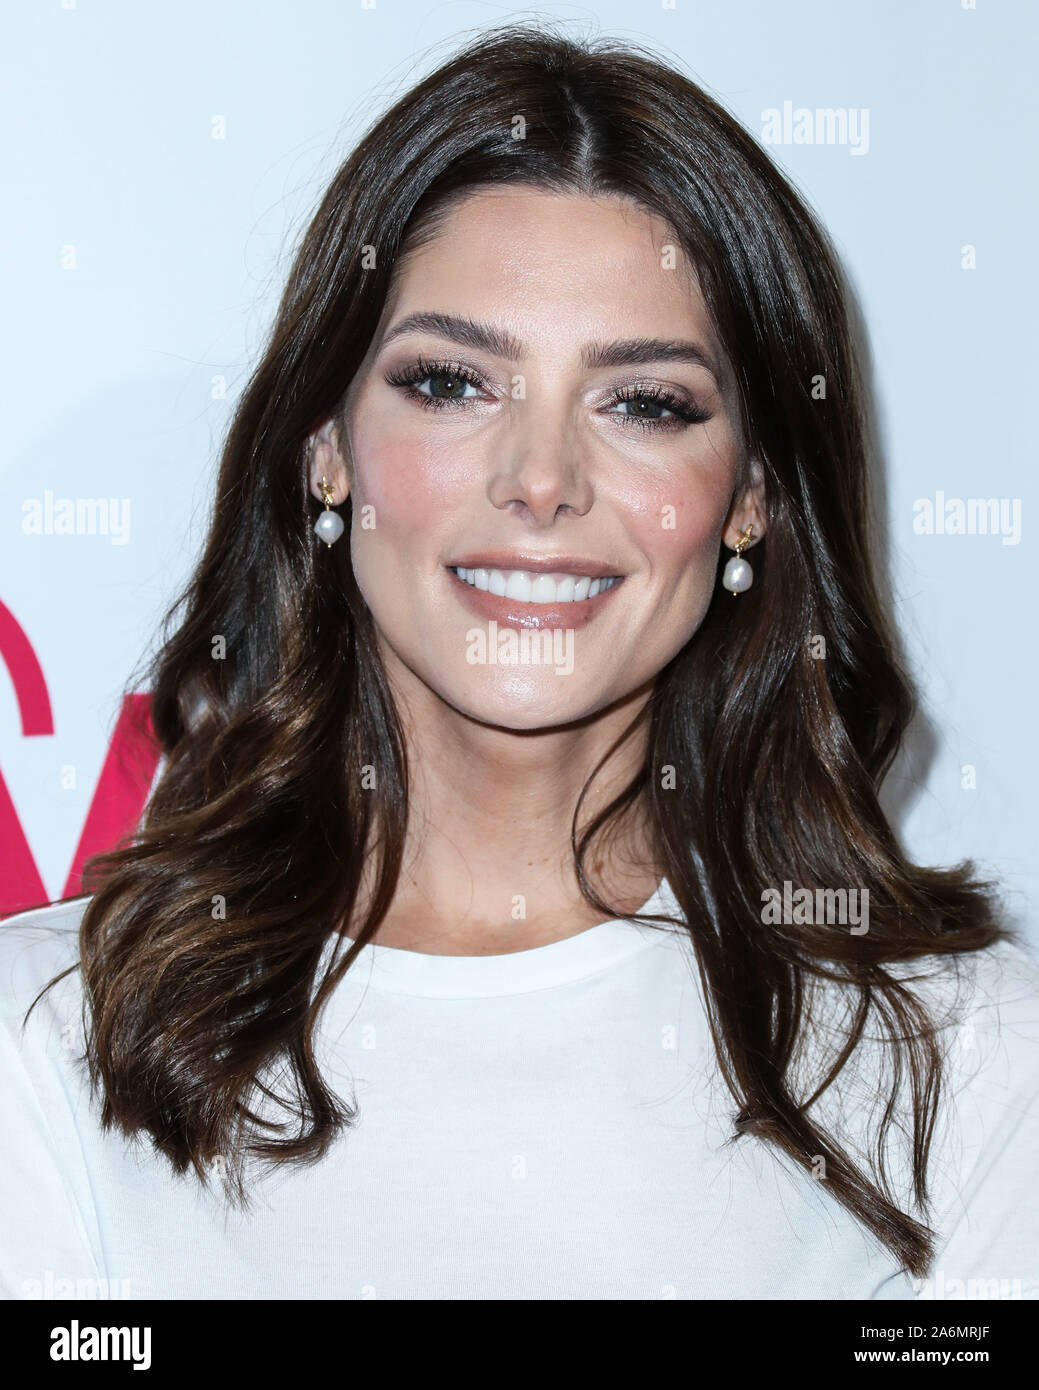 Culver City, USA. 27th Oct, 2019. CULVER CITY, LOS ANGELES, CALIFORNIA, USA - OCTOBER 27: Actress Ashley Greene arrives at the Elizabeth Glaser Pediatric AIDS Foundation's 30th Annual A Time for Heroes Family Festival held at Smashbox Studios on October 27, 2019 in Culver City, Los Angeles, California, USA. (Photo by Xavier Collin/Image Press Agency) Credit: Image Press Agency/Alamy Live News Stock Photo